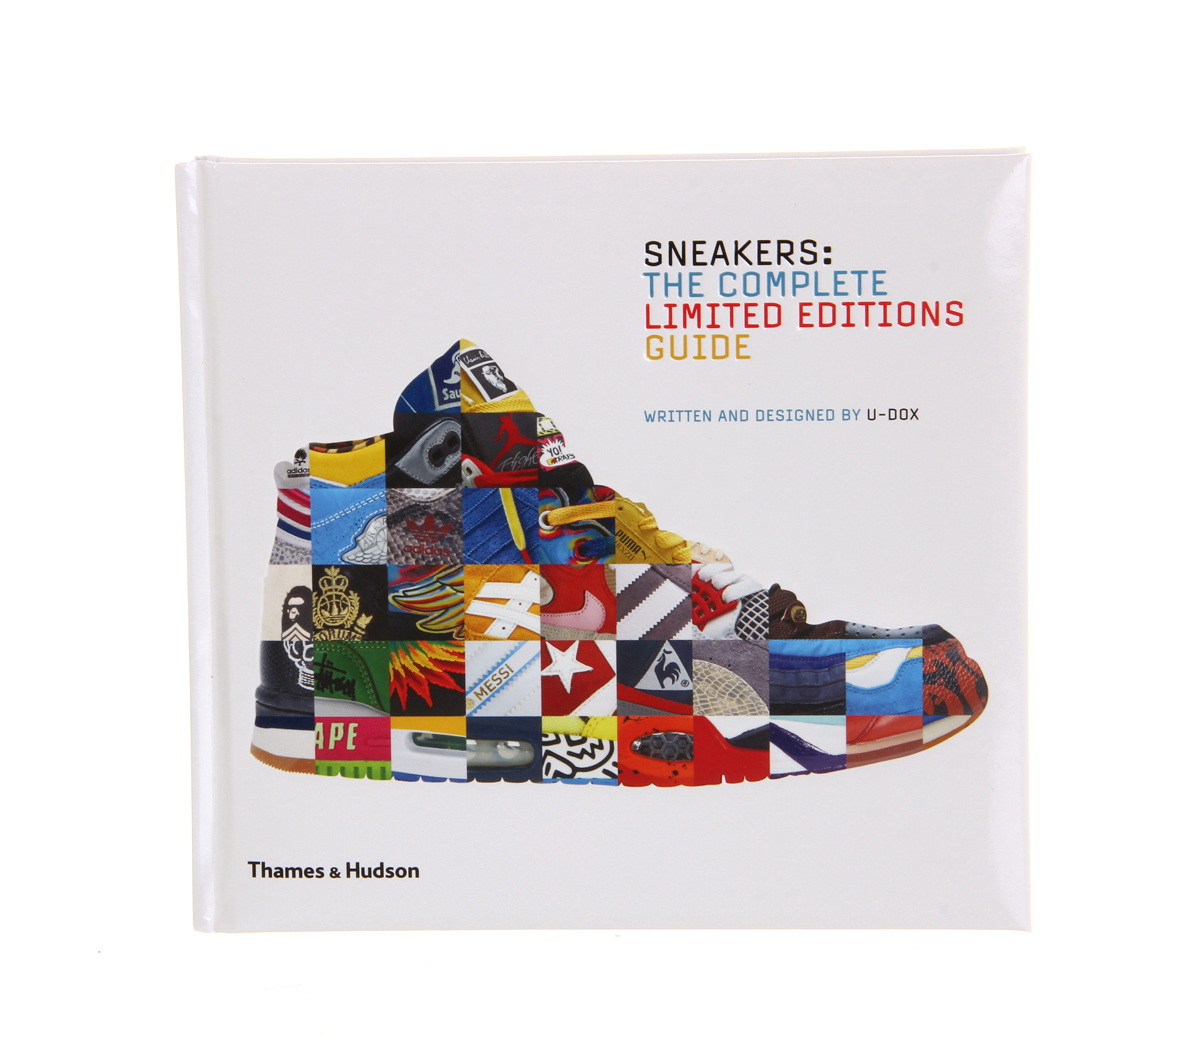 thameshudsonSneakers: The Complete Limited Edition GuideLimited Edition Guide